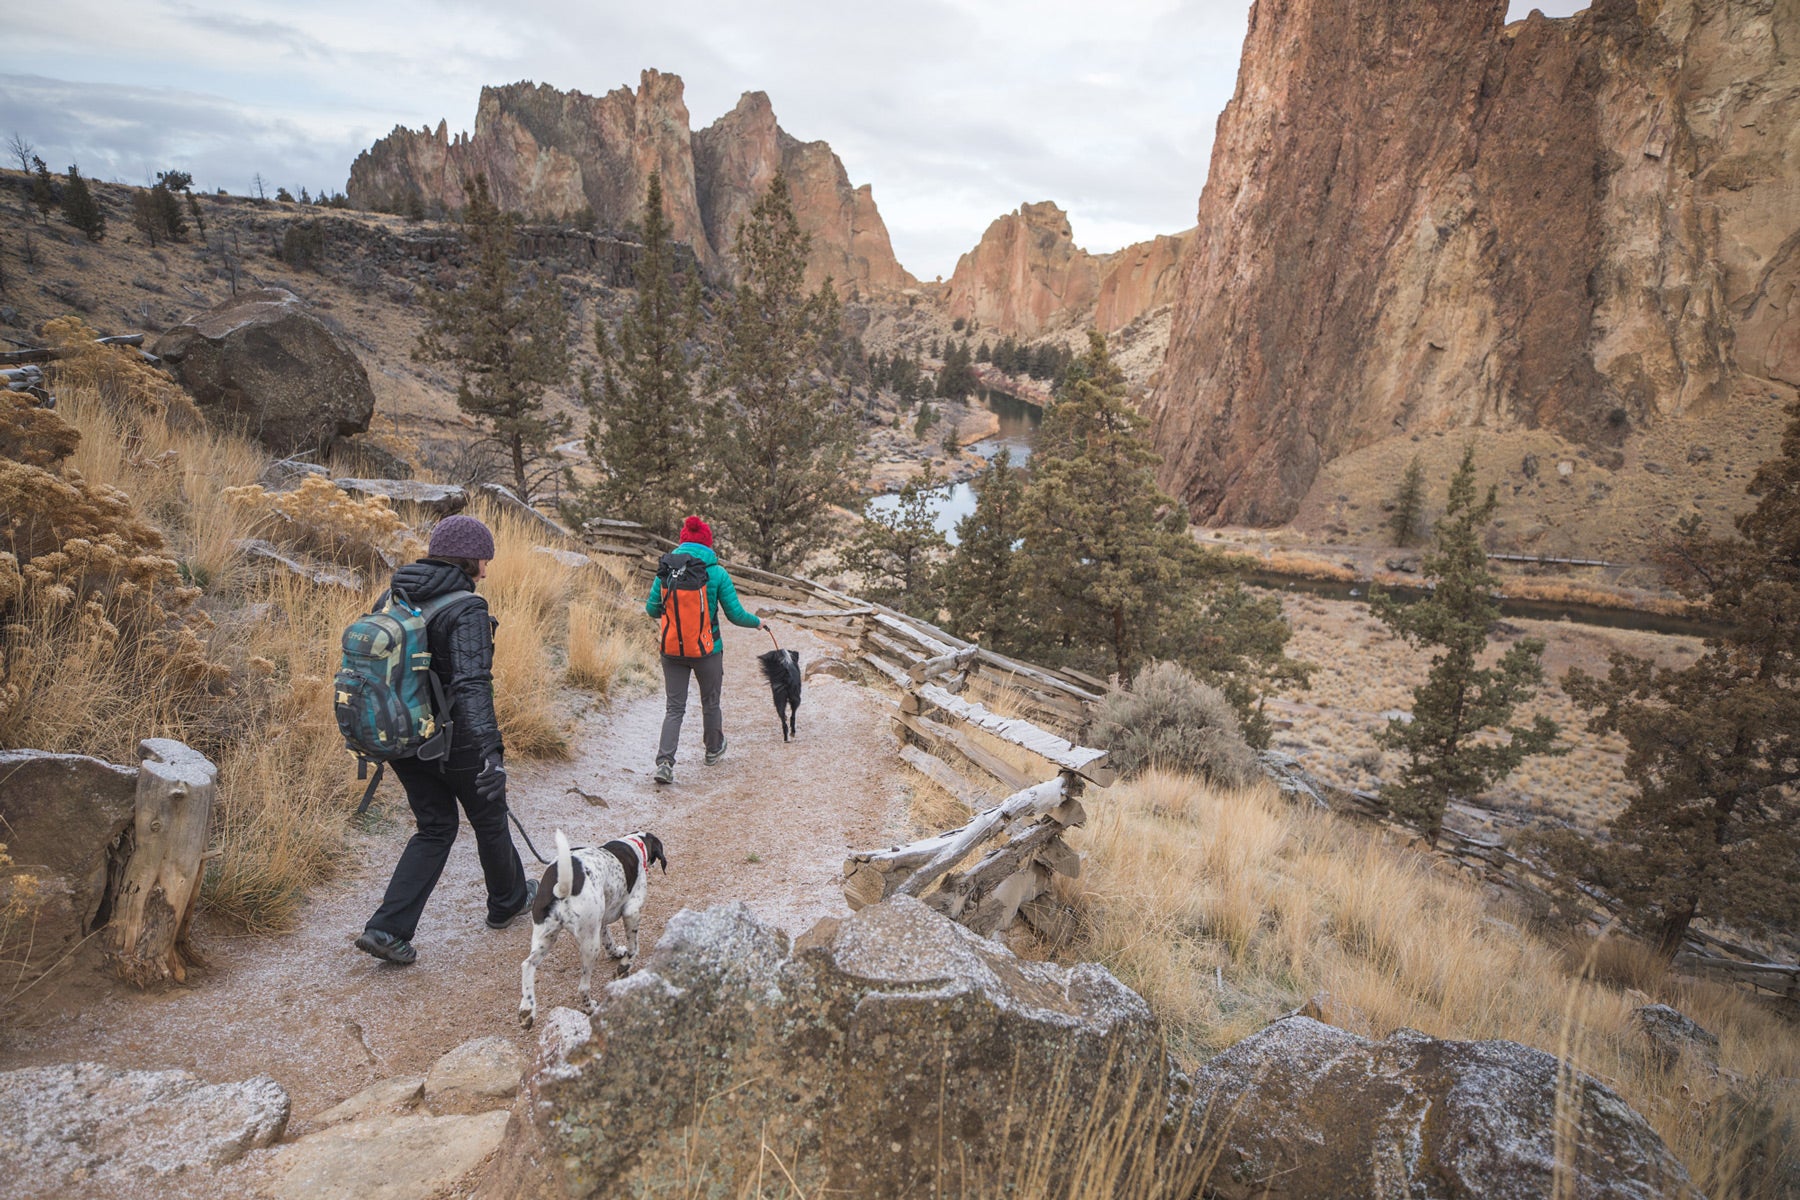 Two climbers with dogs on knot-a-leashes descend on the trail at Smith.